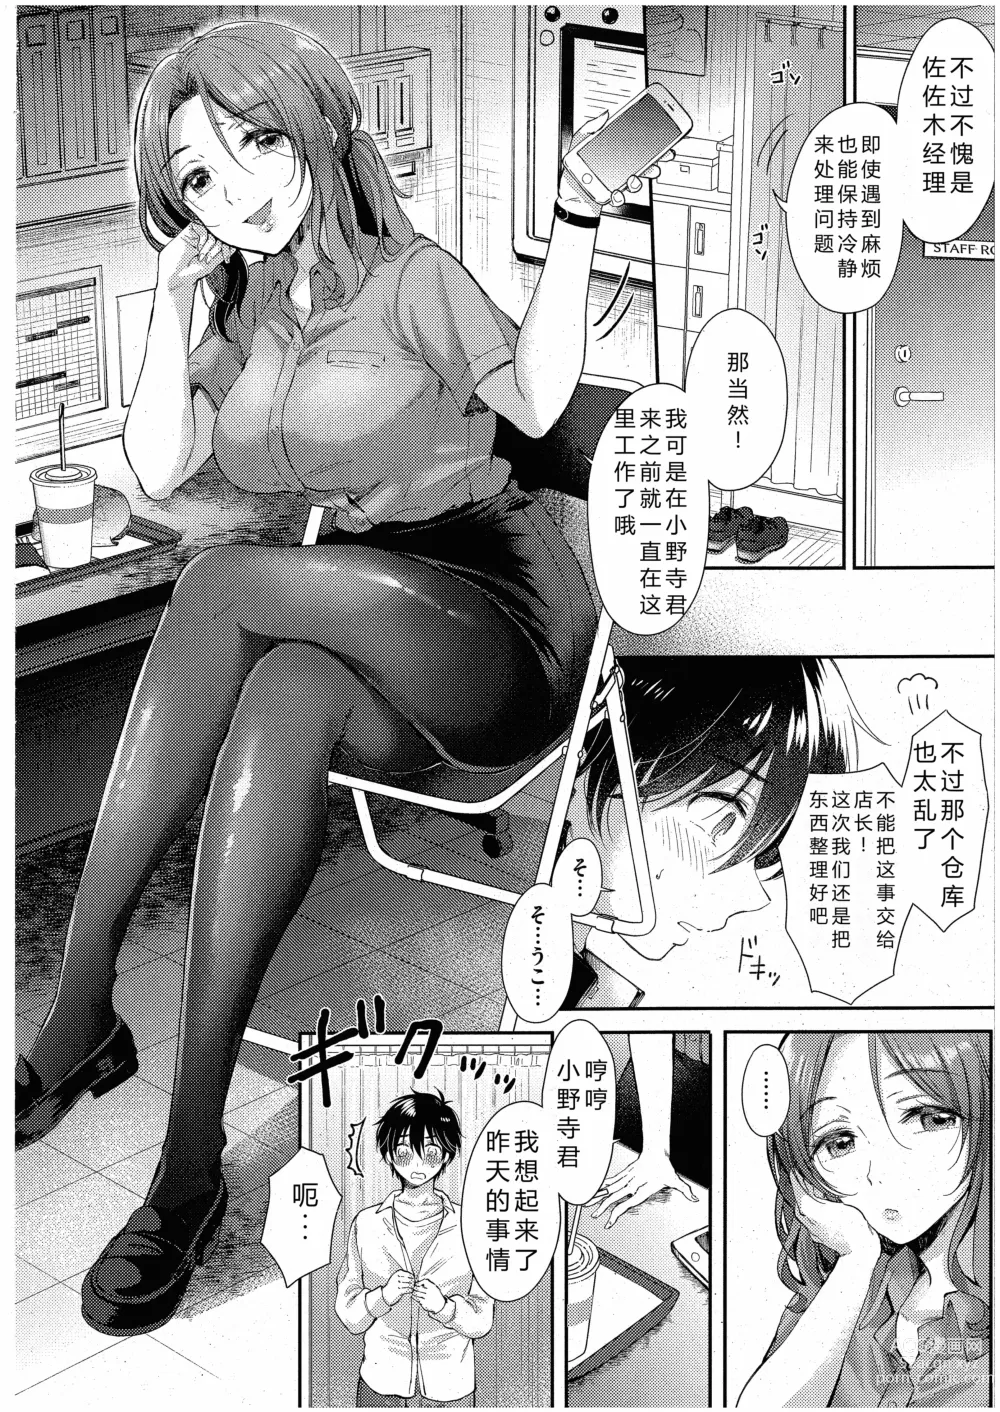 Page 10 of manga Eat in Take Out